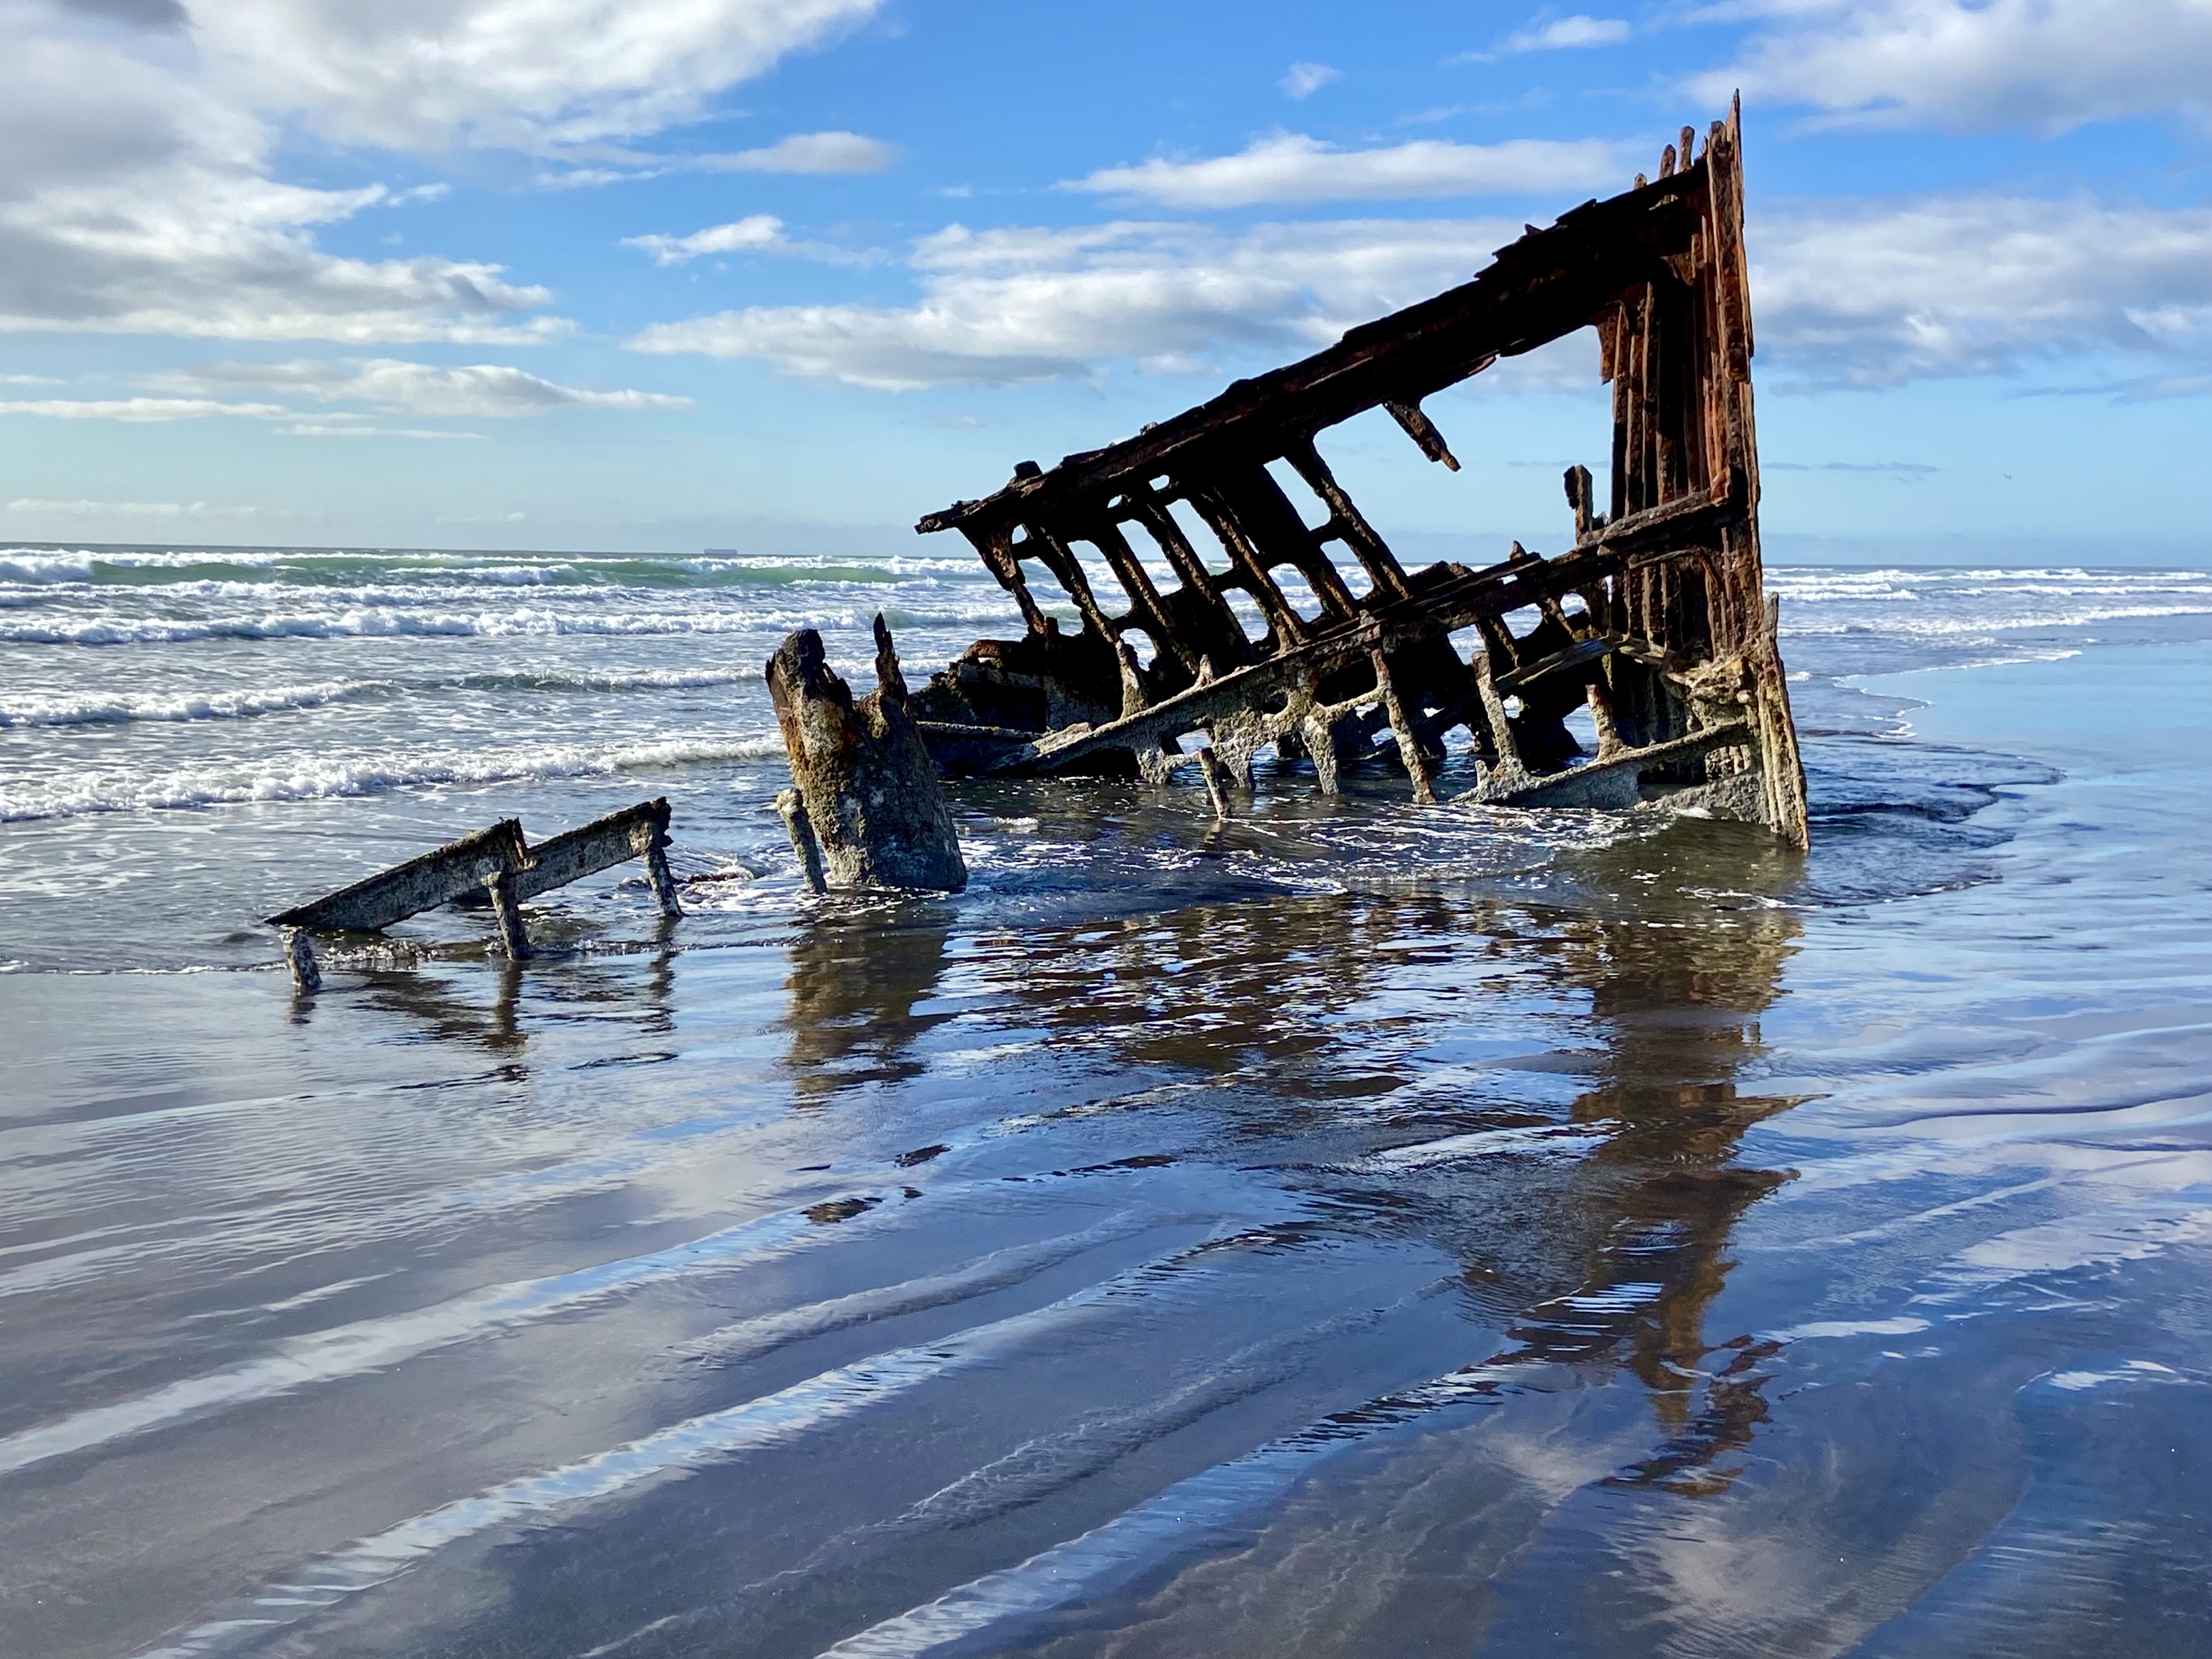 Peter Iredale Shipwreck, Or